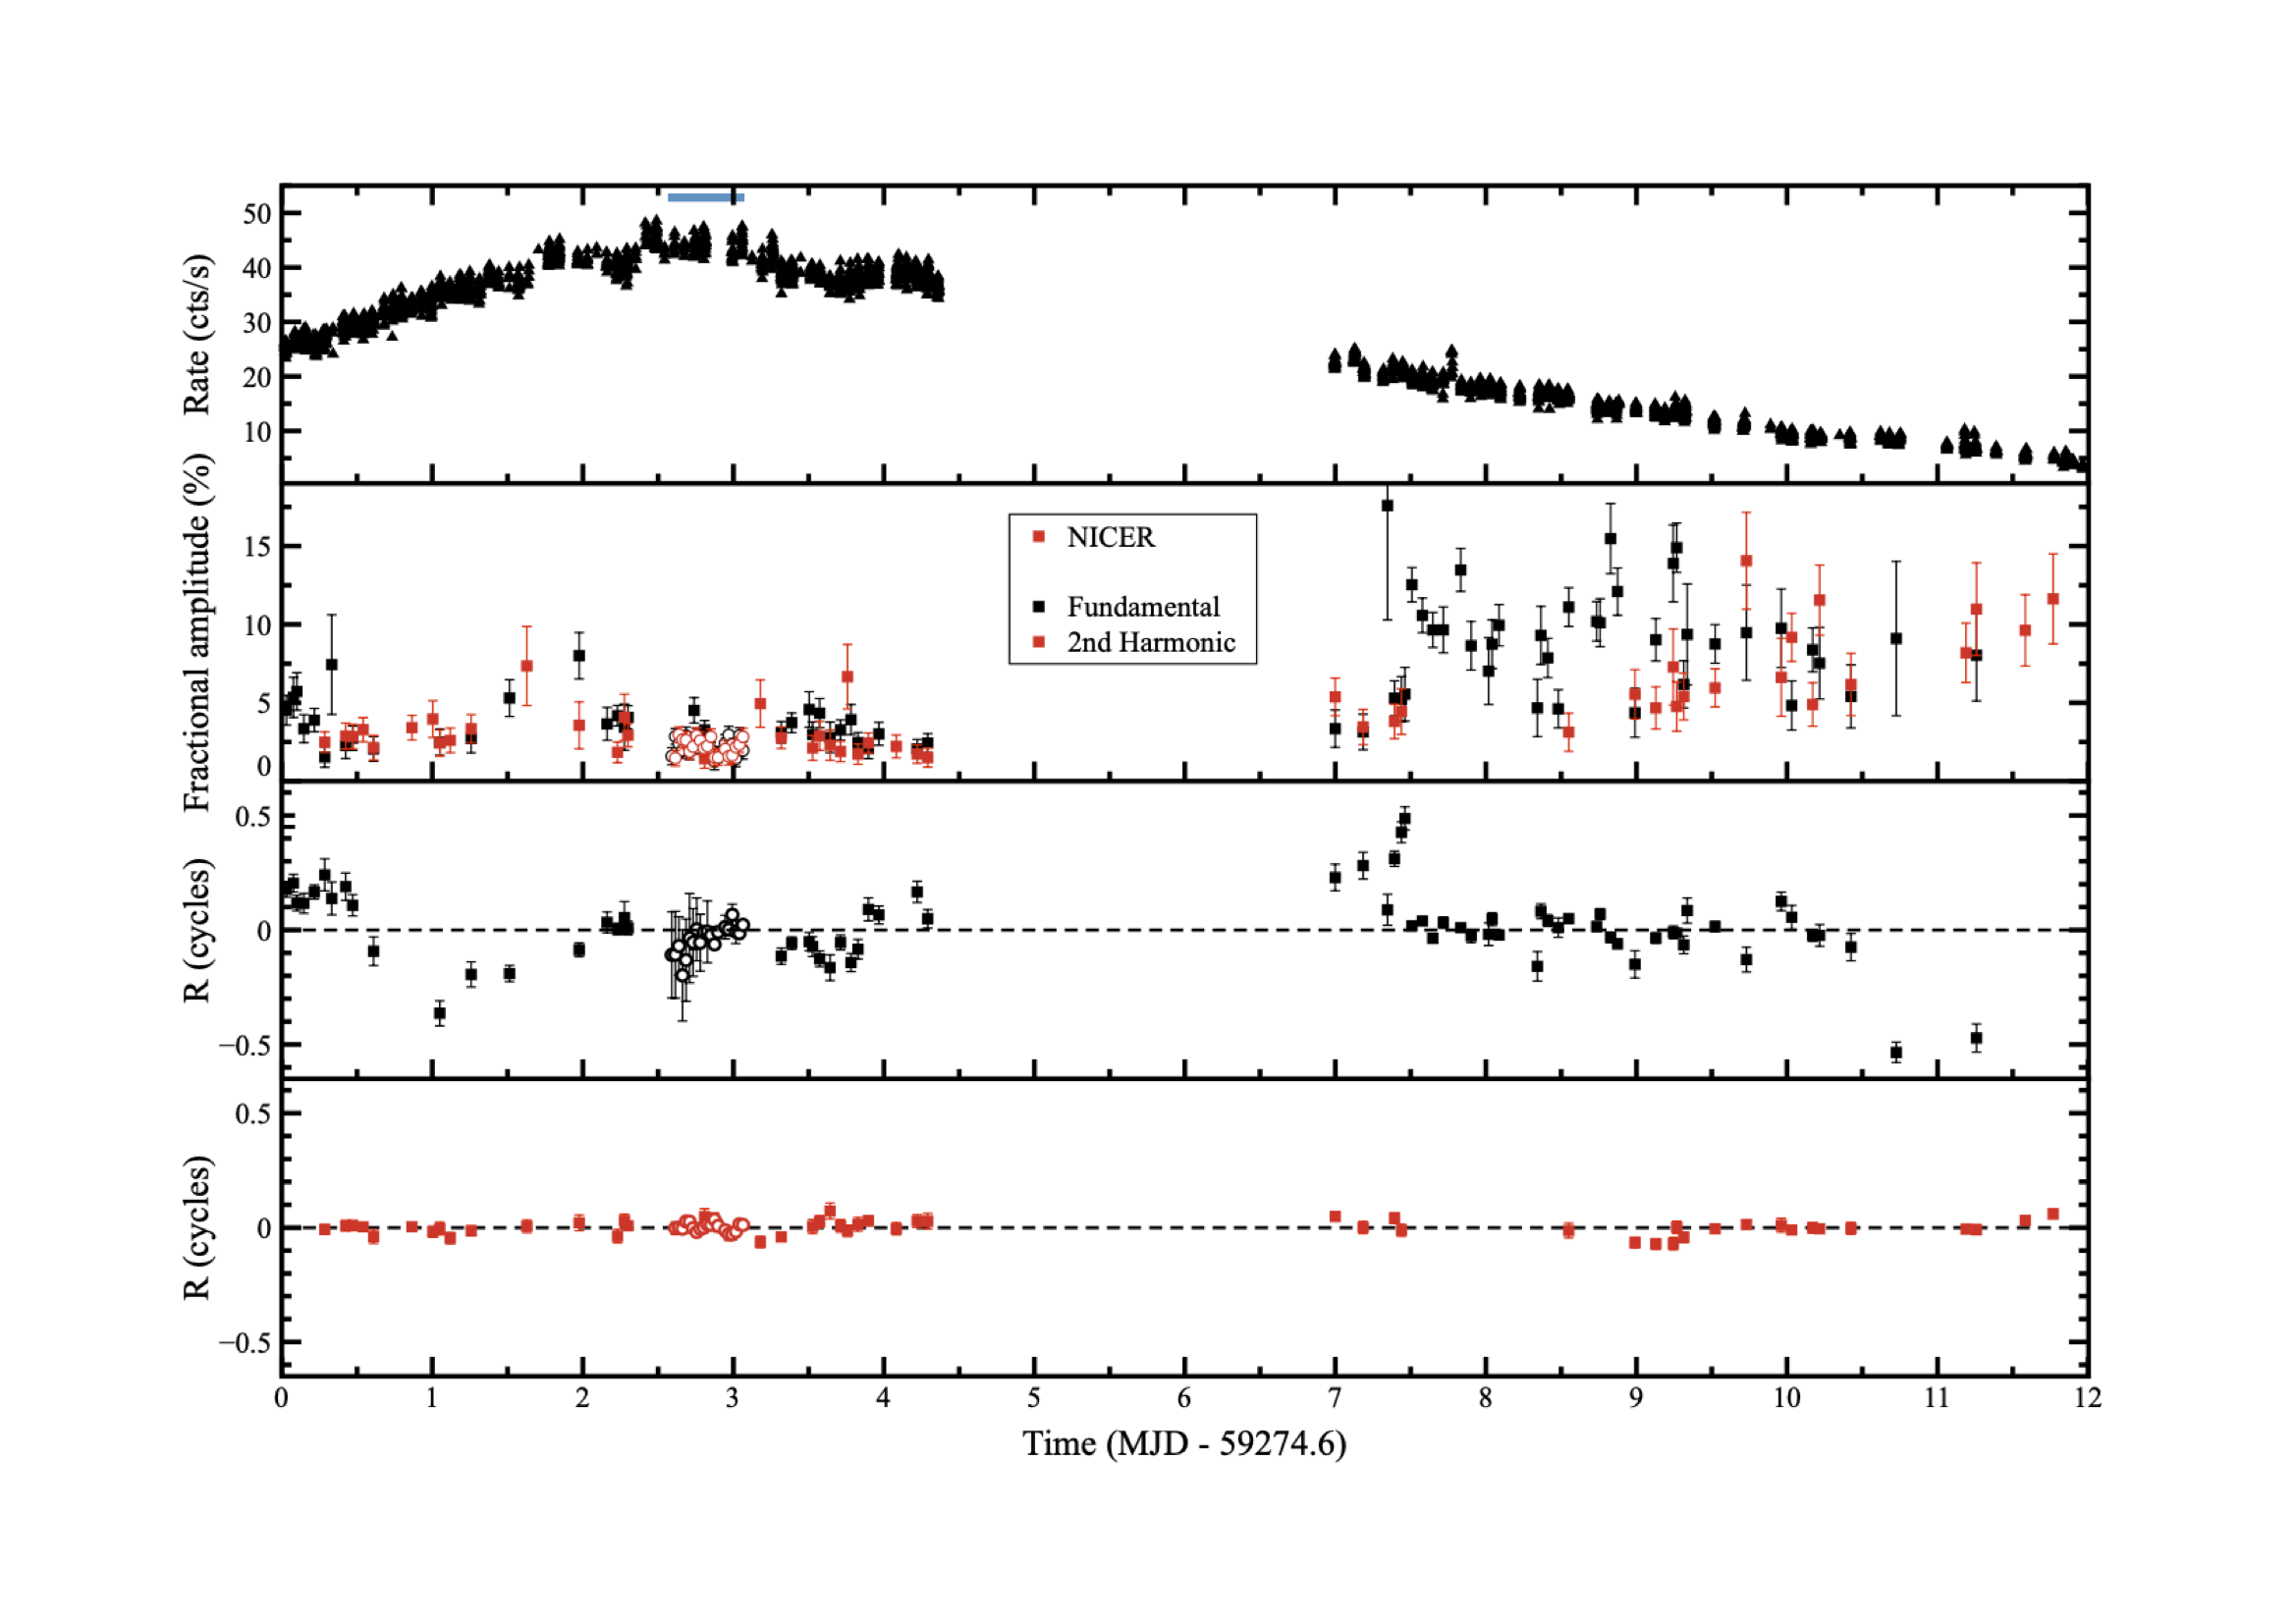 First panel - NICER 0.5-10 keV light curve of the 2021 outburst of the accreting millisecond X-ray pulsar SWIFT J1749.4-2807 starting from March 1, 2021 (MJD 59274.1). Second panel - Time evolution of the fractional amplitude determined for the fundamental (black points) and the second harmonic (red points) components used to model the source pulse profiles created from the NICER (filled squares) dataset. Third panel - Fundamental pulse phase residuals in units of phase cycles relative to the best-fitting solution. Letters from a to d represent the time intervals selected to investigate the pulse profile shape evolution around a phase jump episode. Fourth panel - Second harmonic pulse phase residuals in units of phase cycles relative to the best-fitting solution.